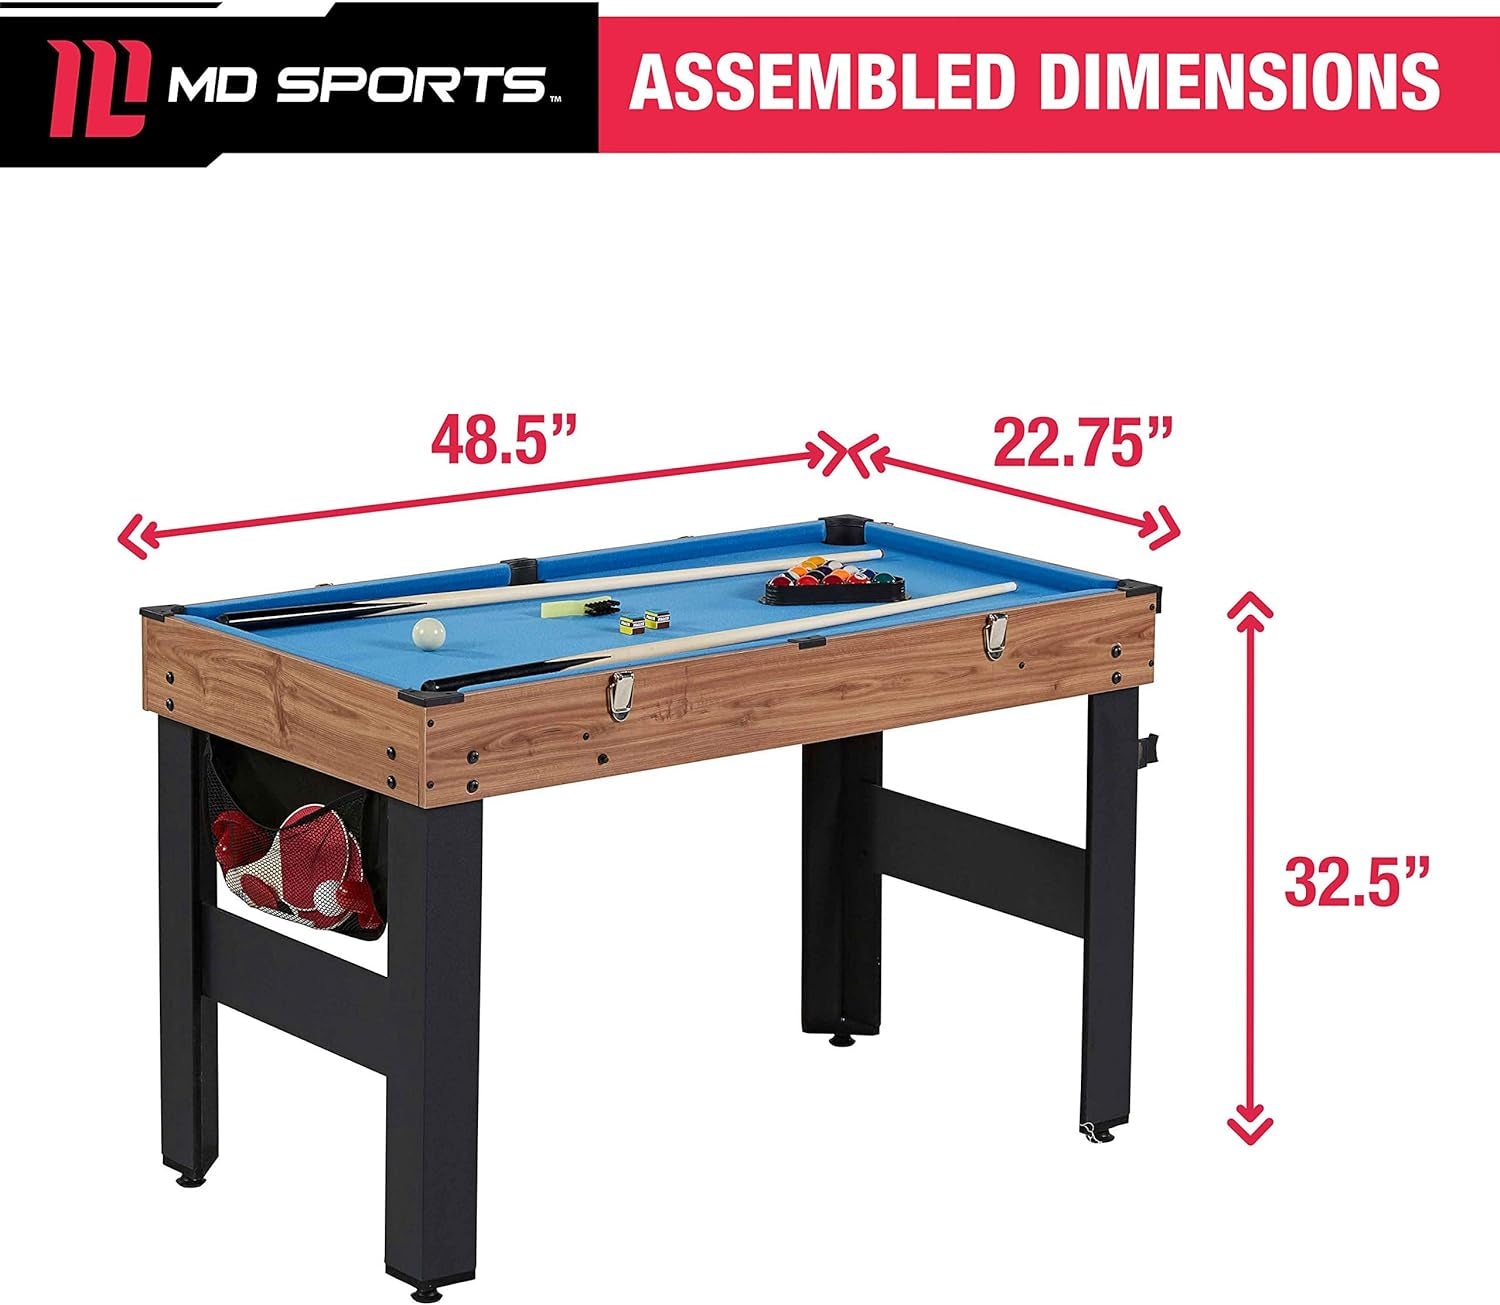 Combination Games Multiple Styles Arcade Collection, Billiards, Ping Pong, Hockey, Basketball and Foosball Combination Kit Comes with All the Basics